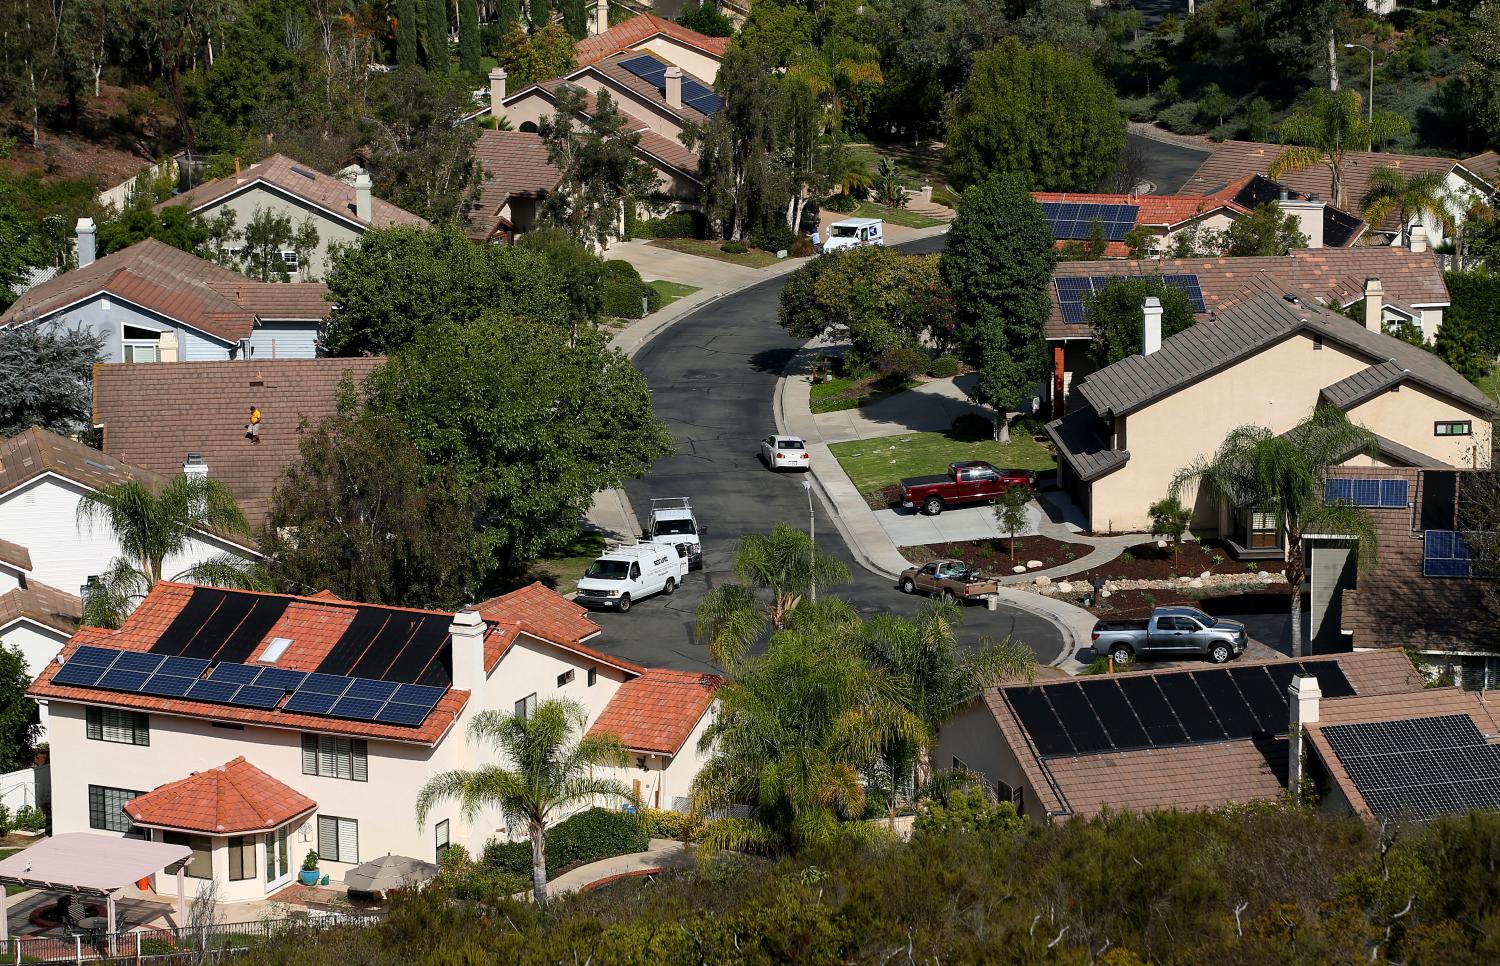 Multiple homes with solar panels are shown in Scripps Ranch, San Diego, California, U.S.